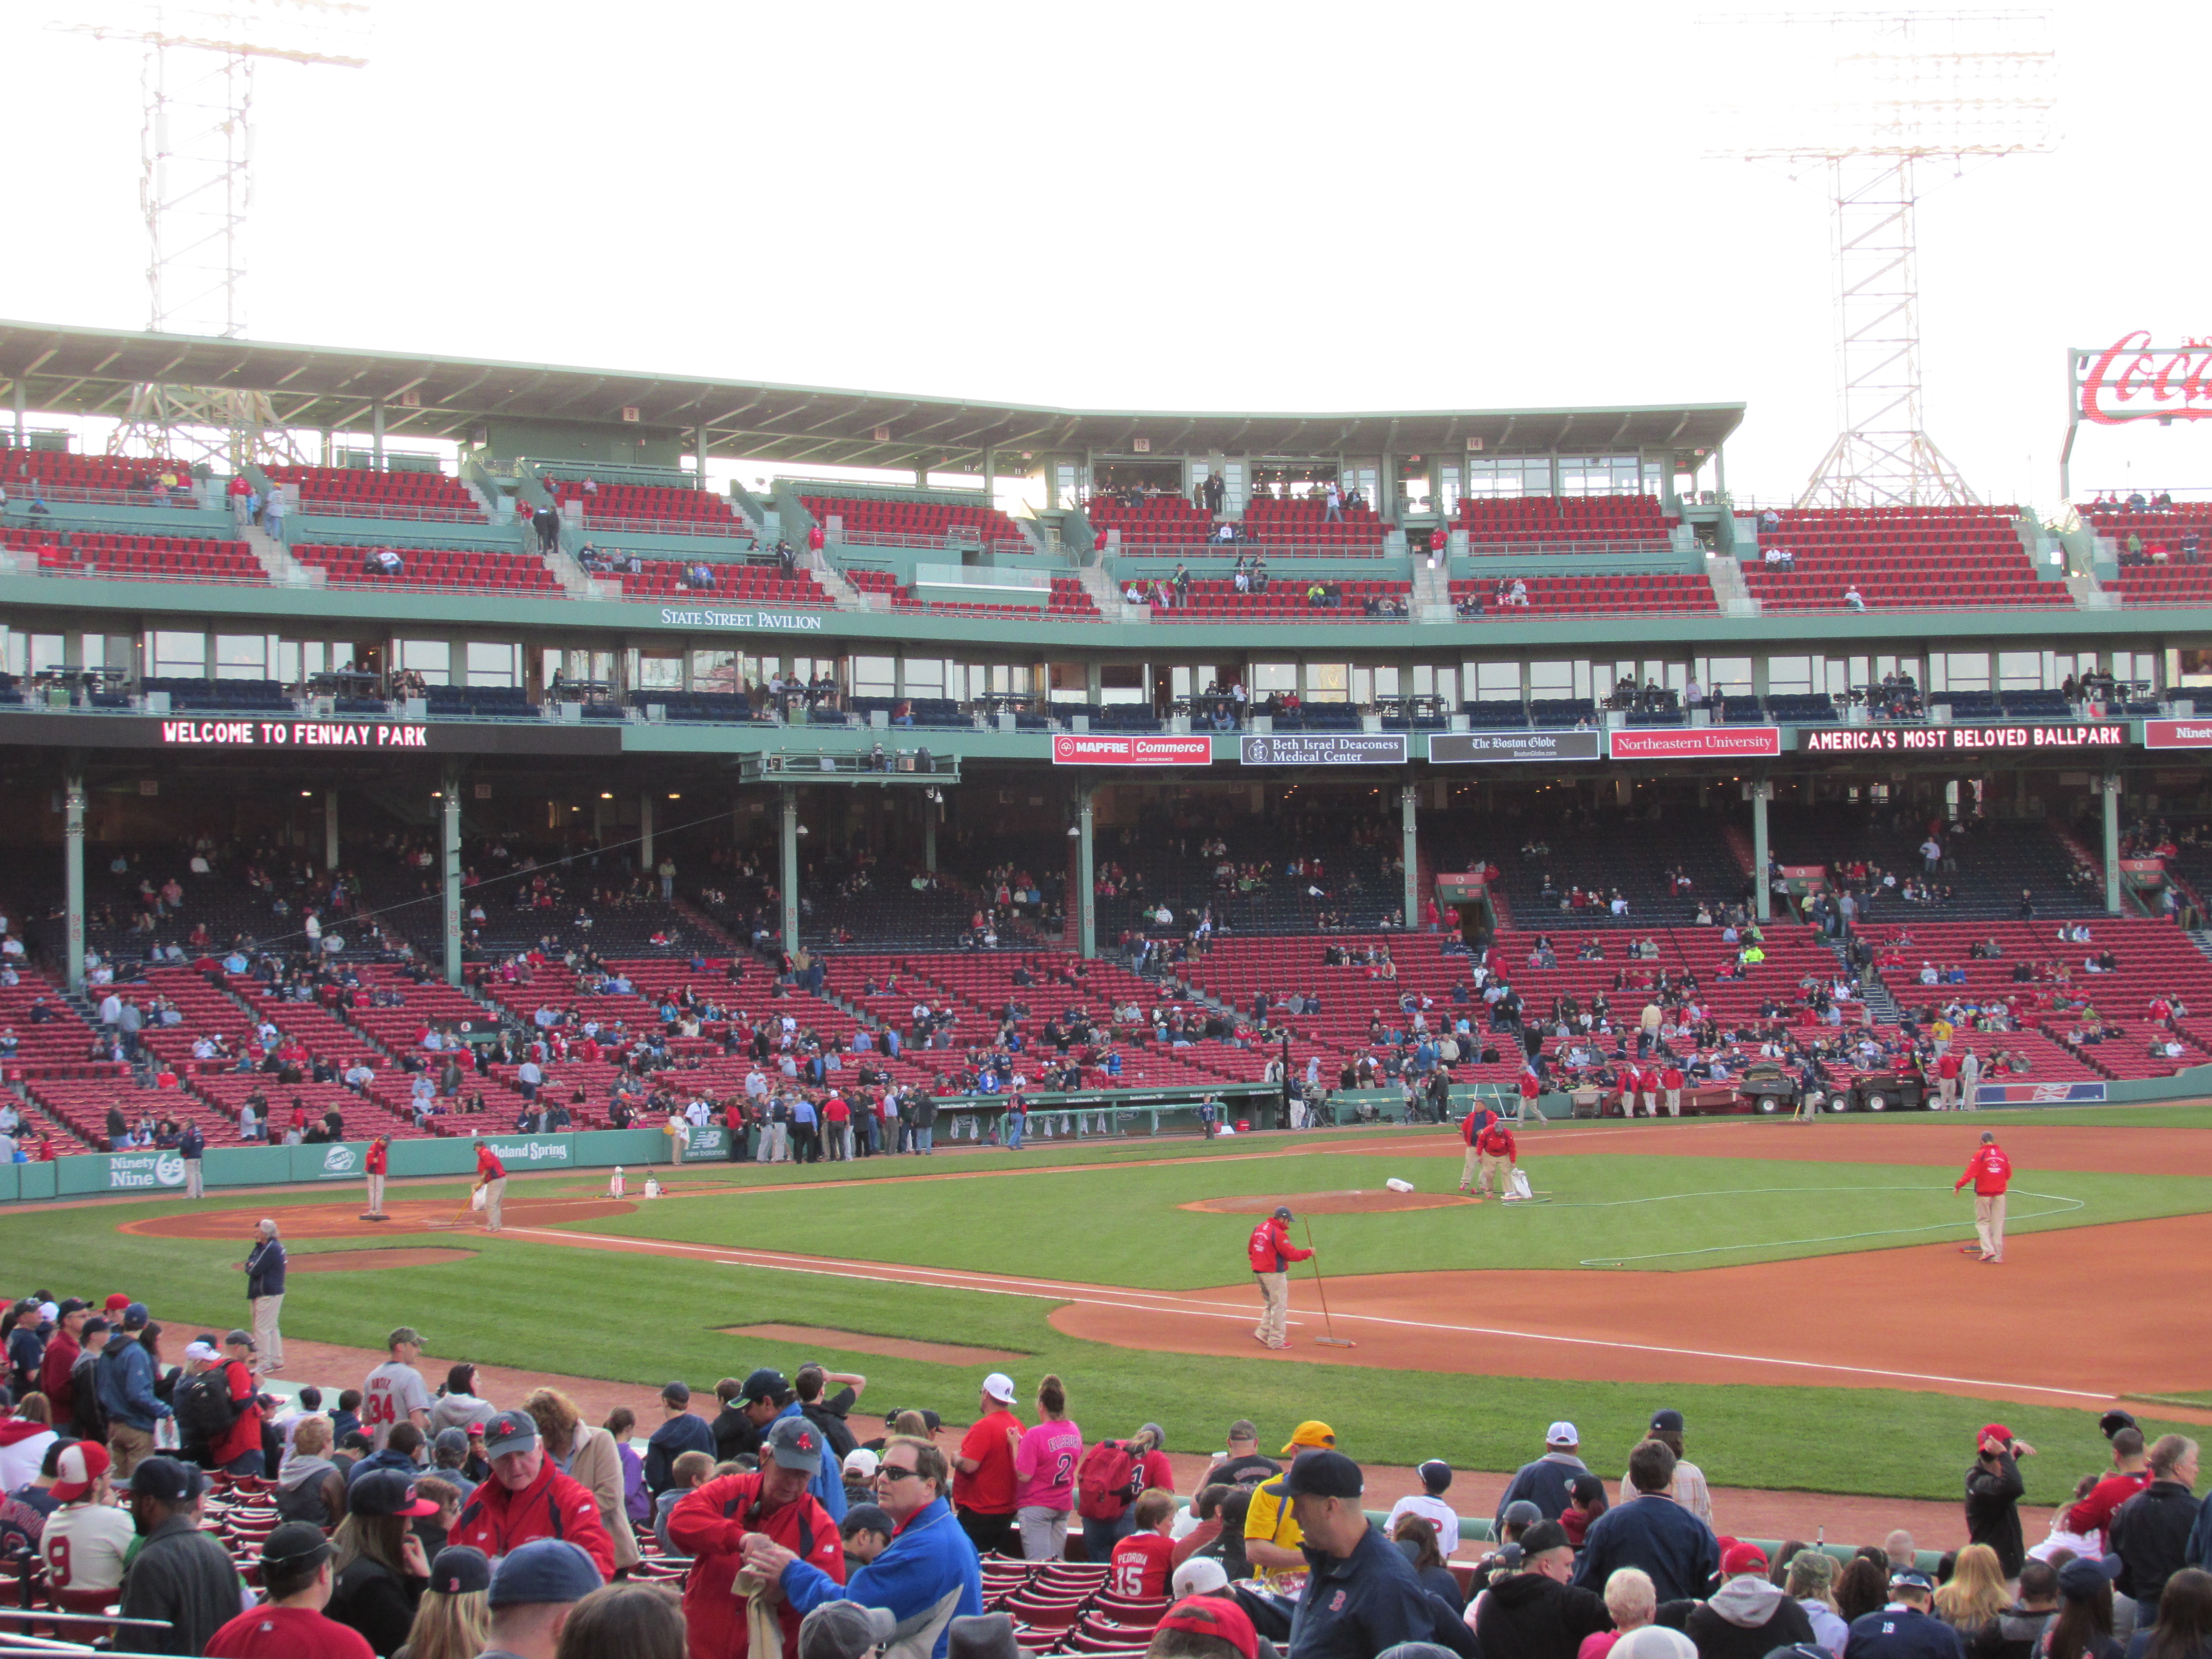 Fenway Park is looking nicer than ever.